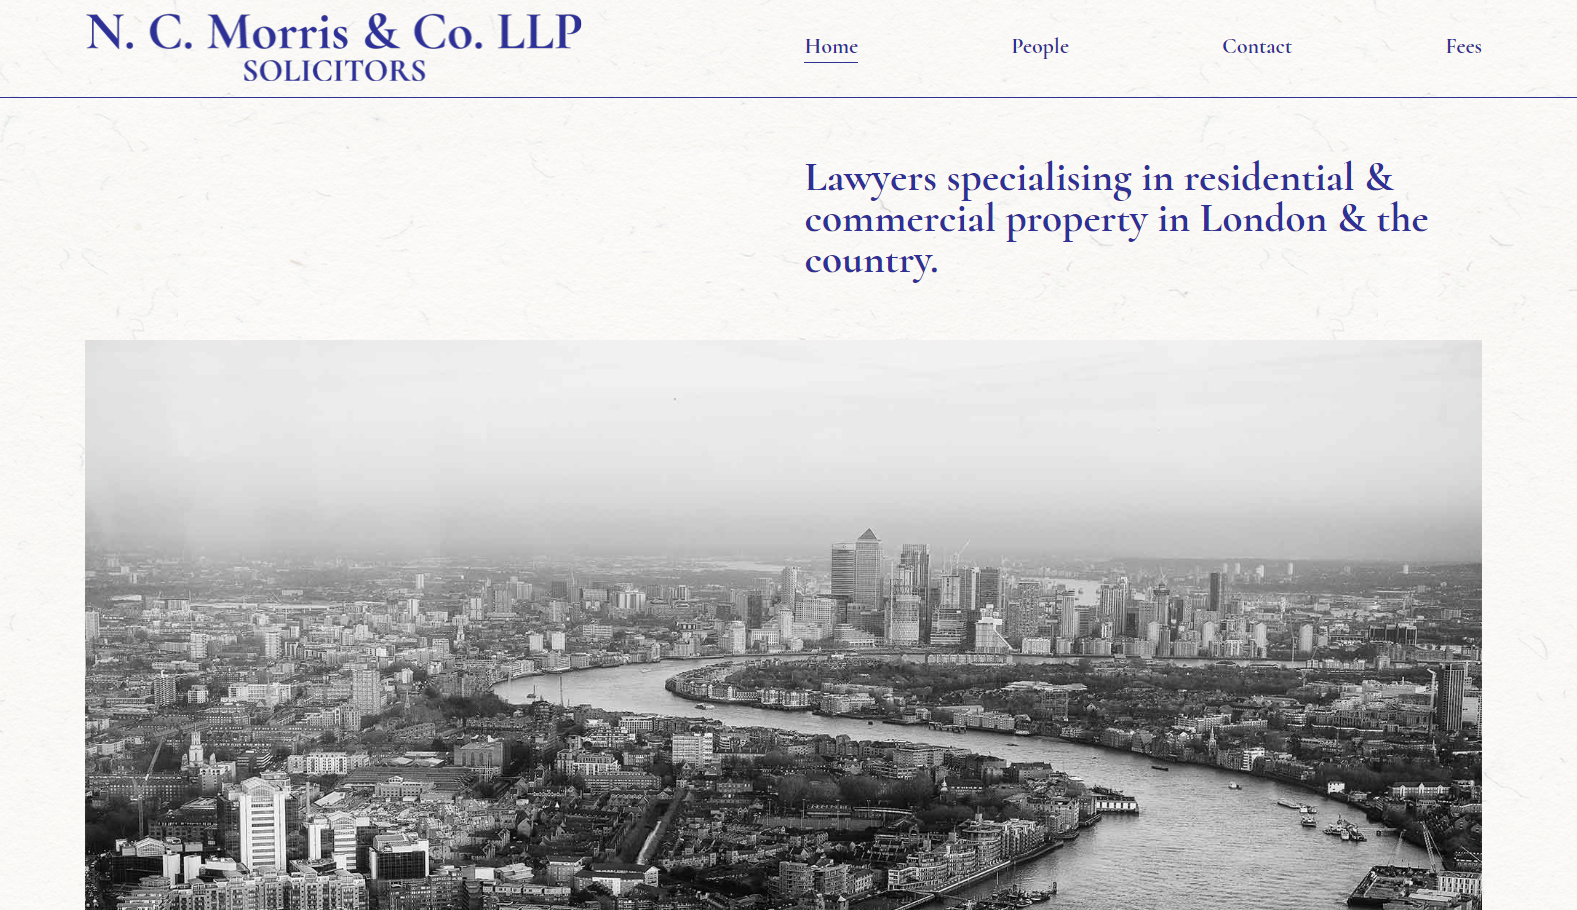 Preview of the N.C. Morris LLP website home page.